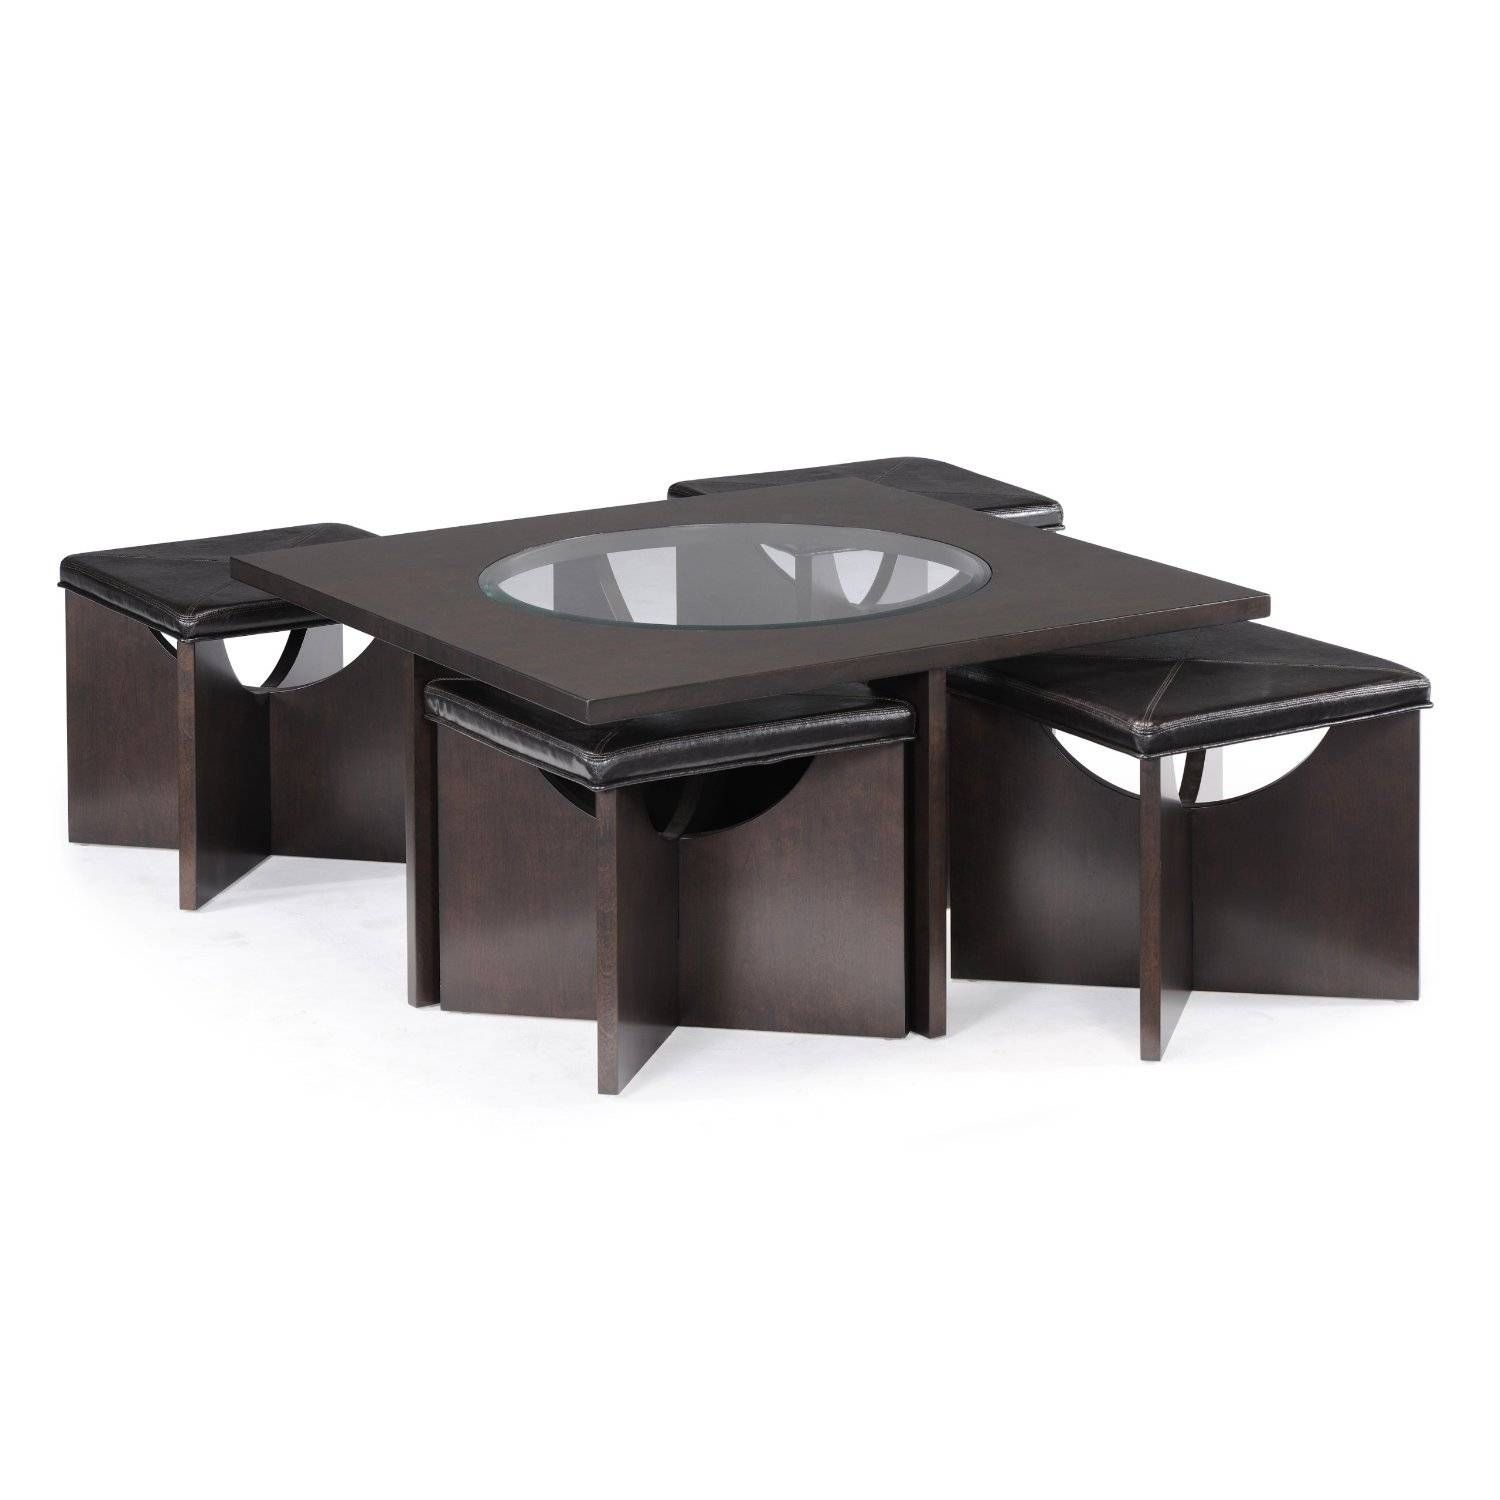 Furniture: Luxury Coffee Table With Stools For Living Room Inside Square Wood Coffee Tables With Storage (View 14 of 30)